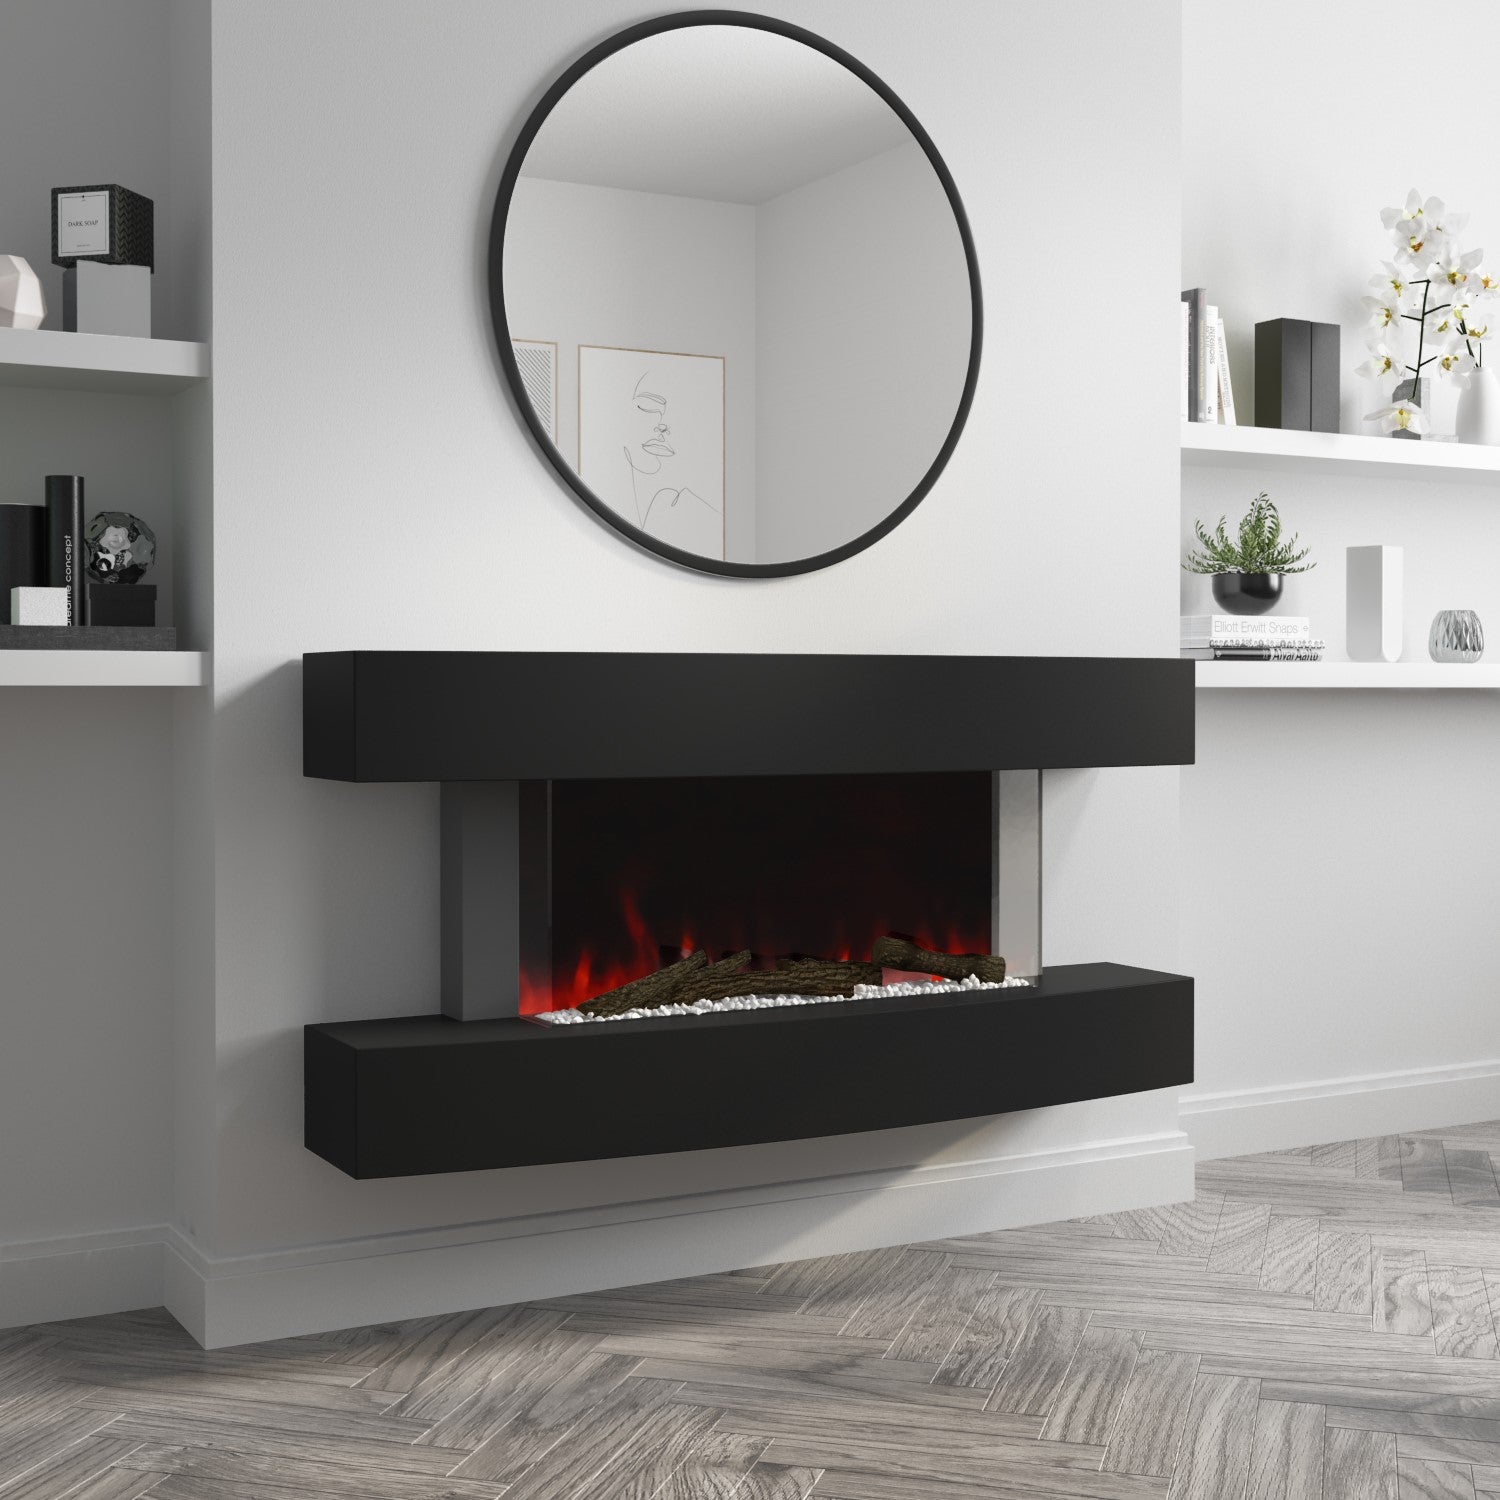 Matt Black Wall Mounted Curved Electric Fire 47 Inch